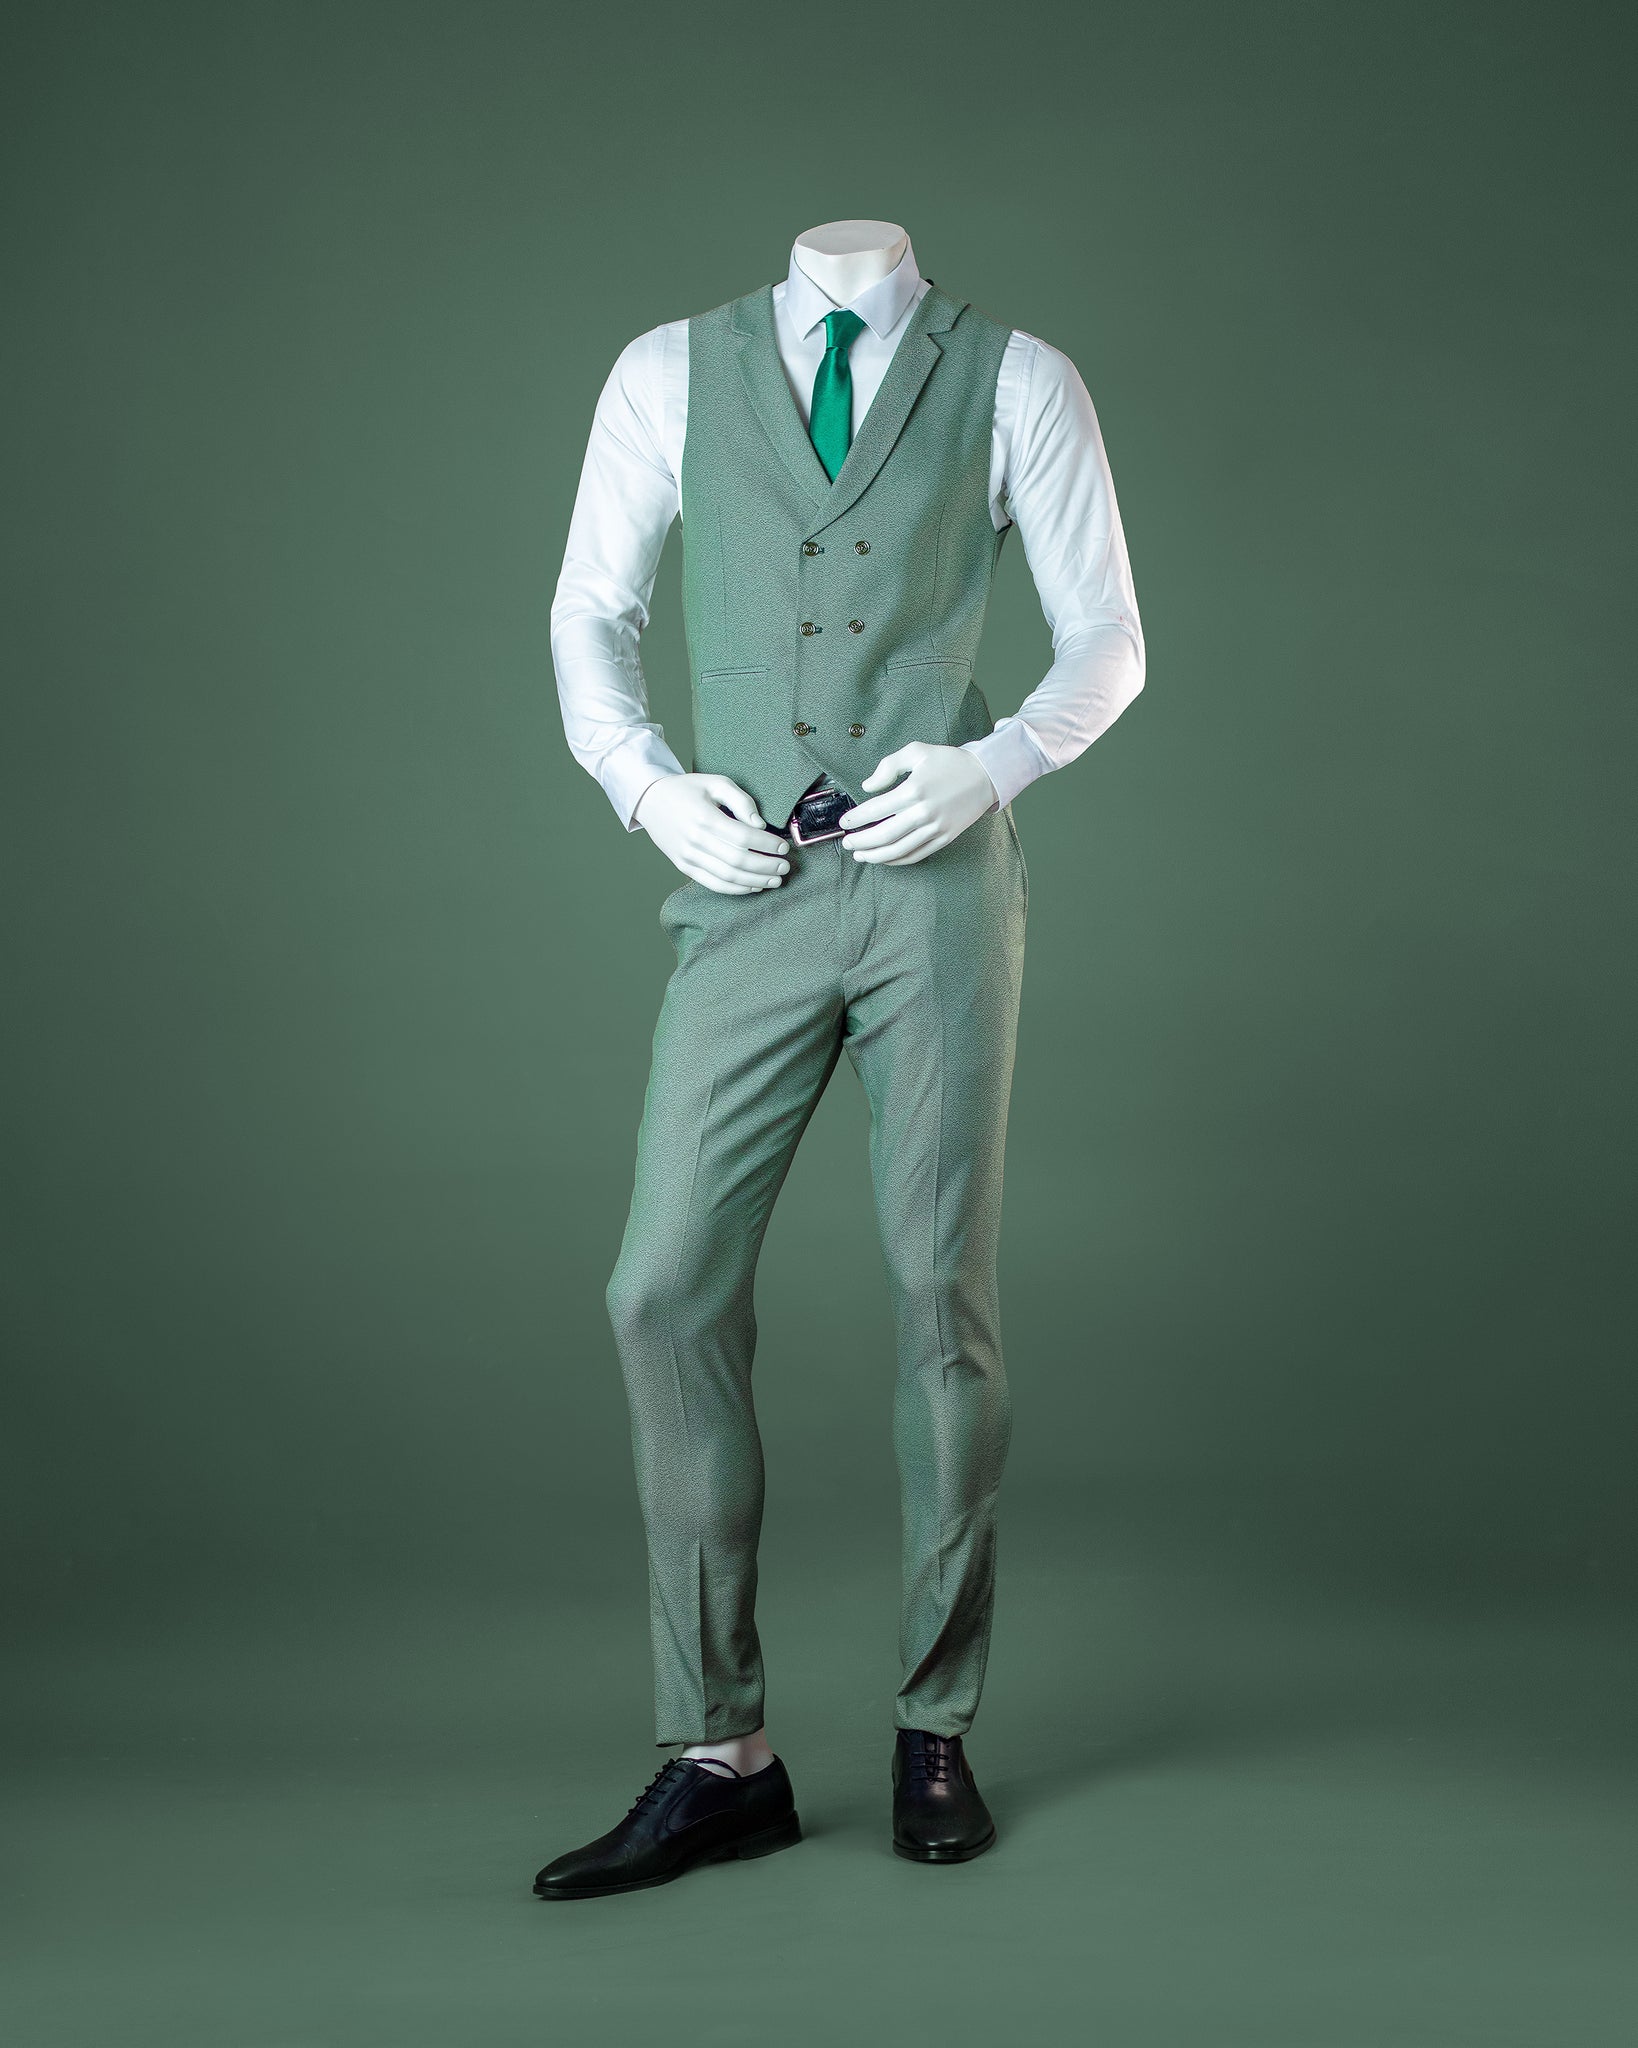 3-Piece Green Checkered SuperSuit